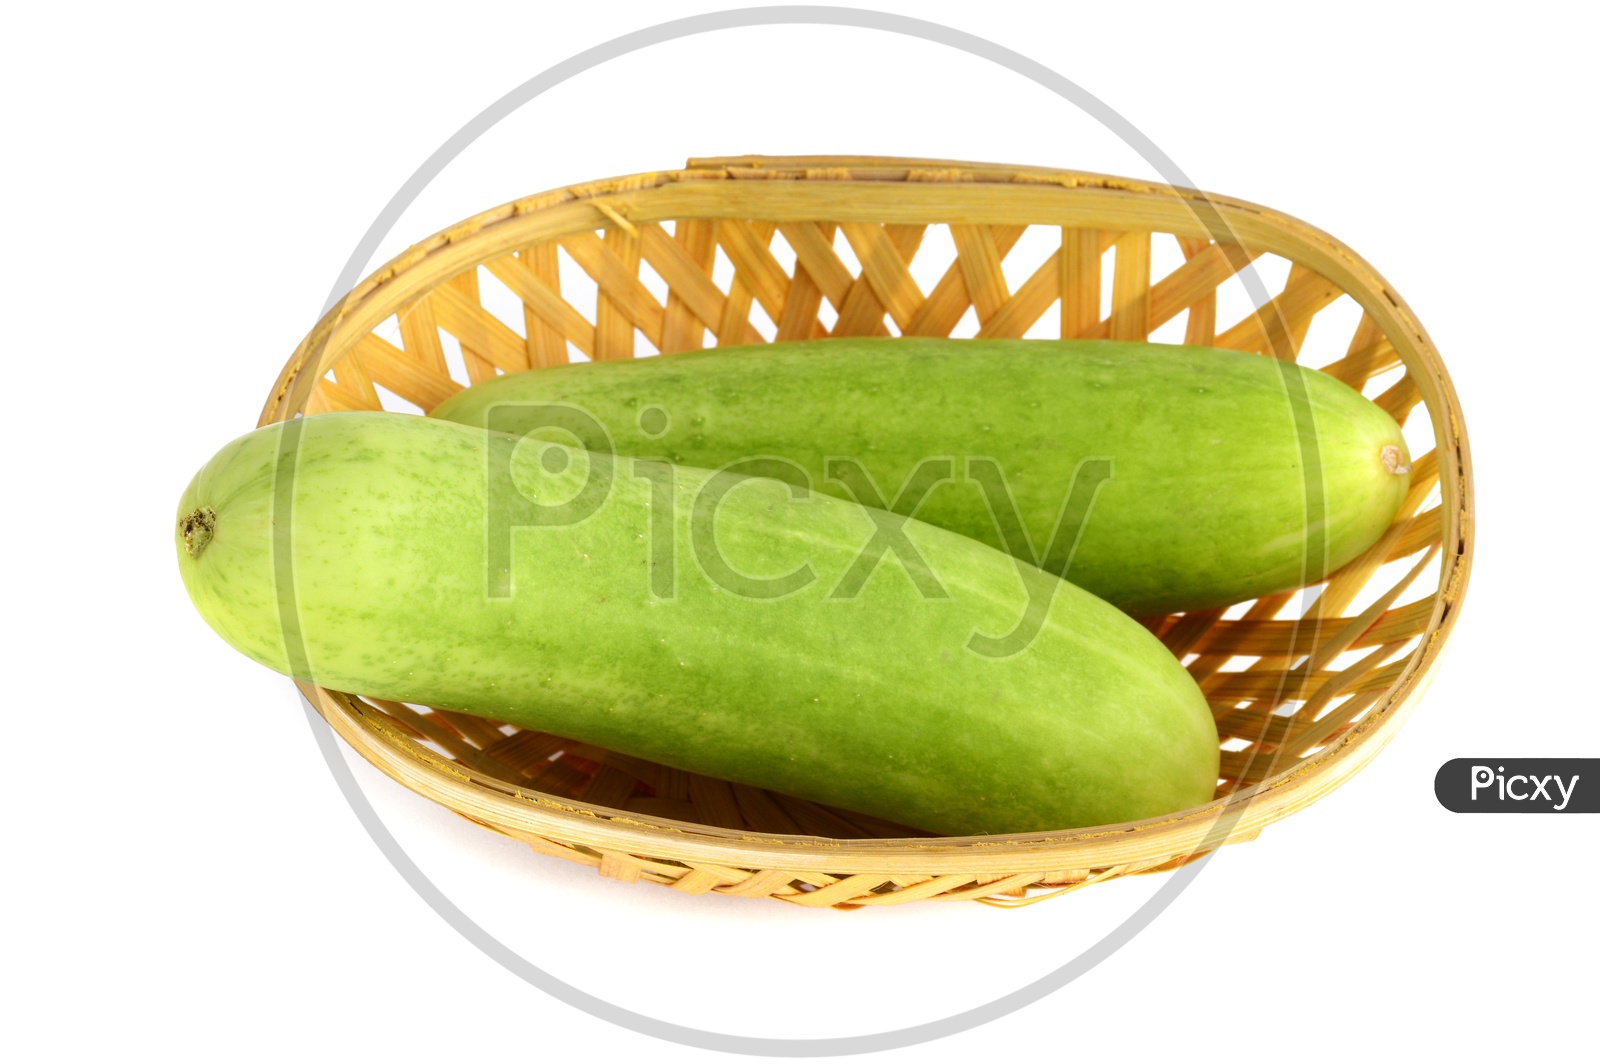 Fresh Green Cucumber Or Keera in a Wooden Weaved Basket on an Isolated White Background